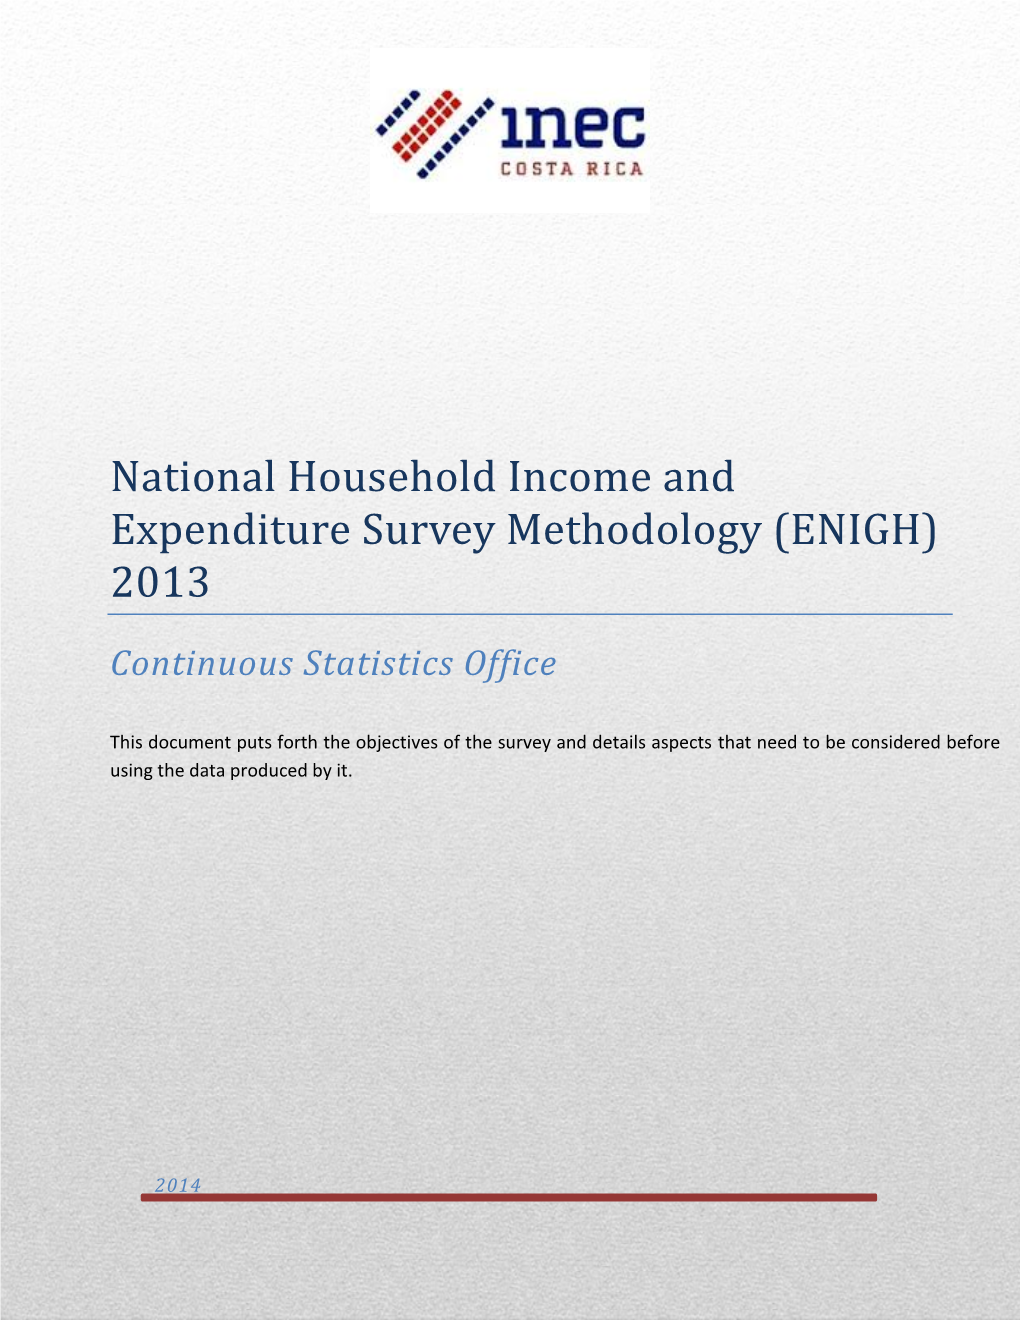 National Household Income and Expenditure Survey Methodology (ENIGH) 2013